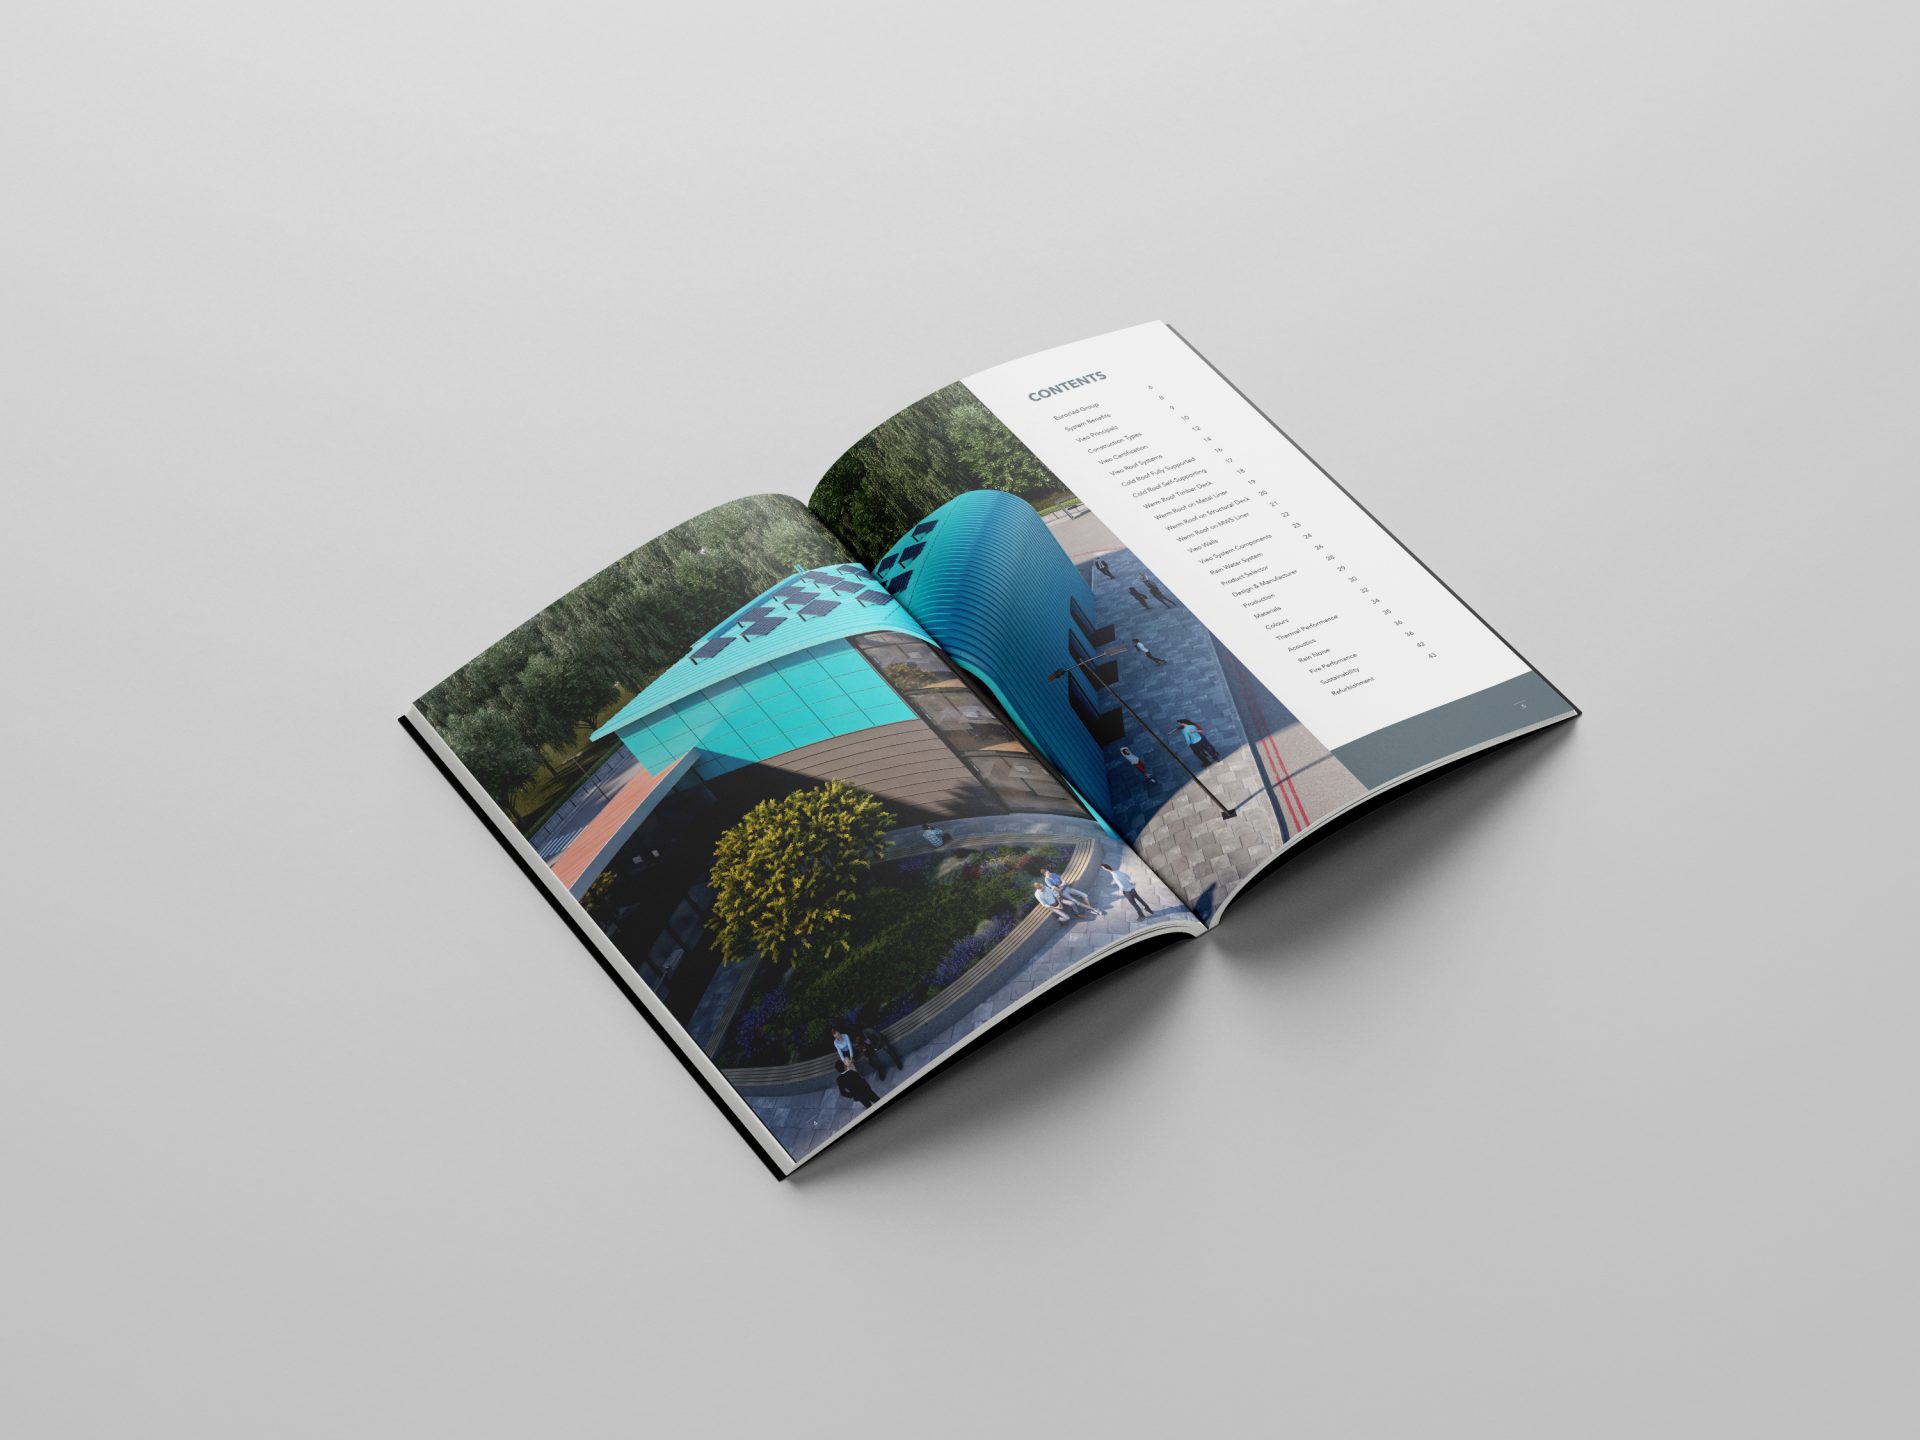 VIEO brochure designed using CGI images by Do Digital Agency